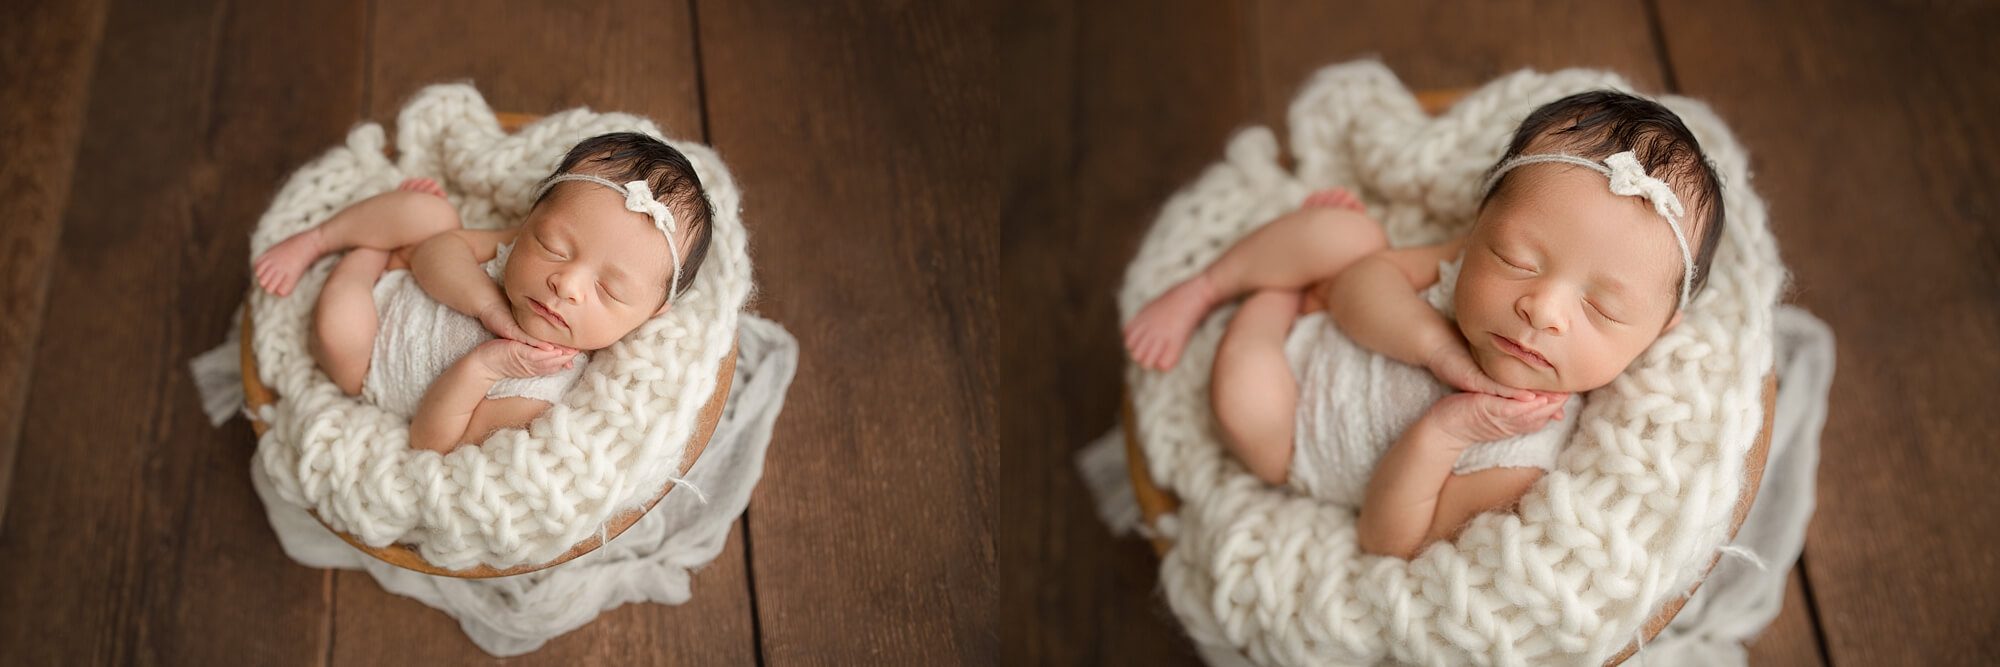 baby girl j | Puyallup newborn photographer | ufc Mighty Mouse